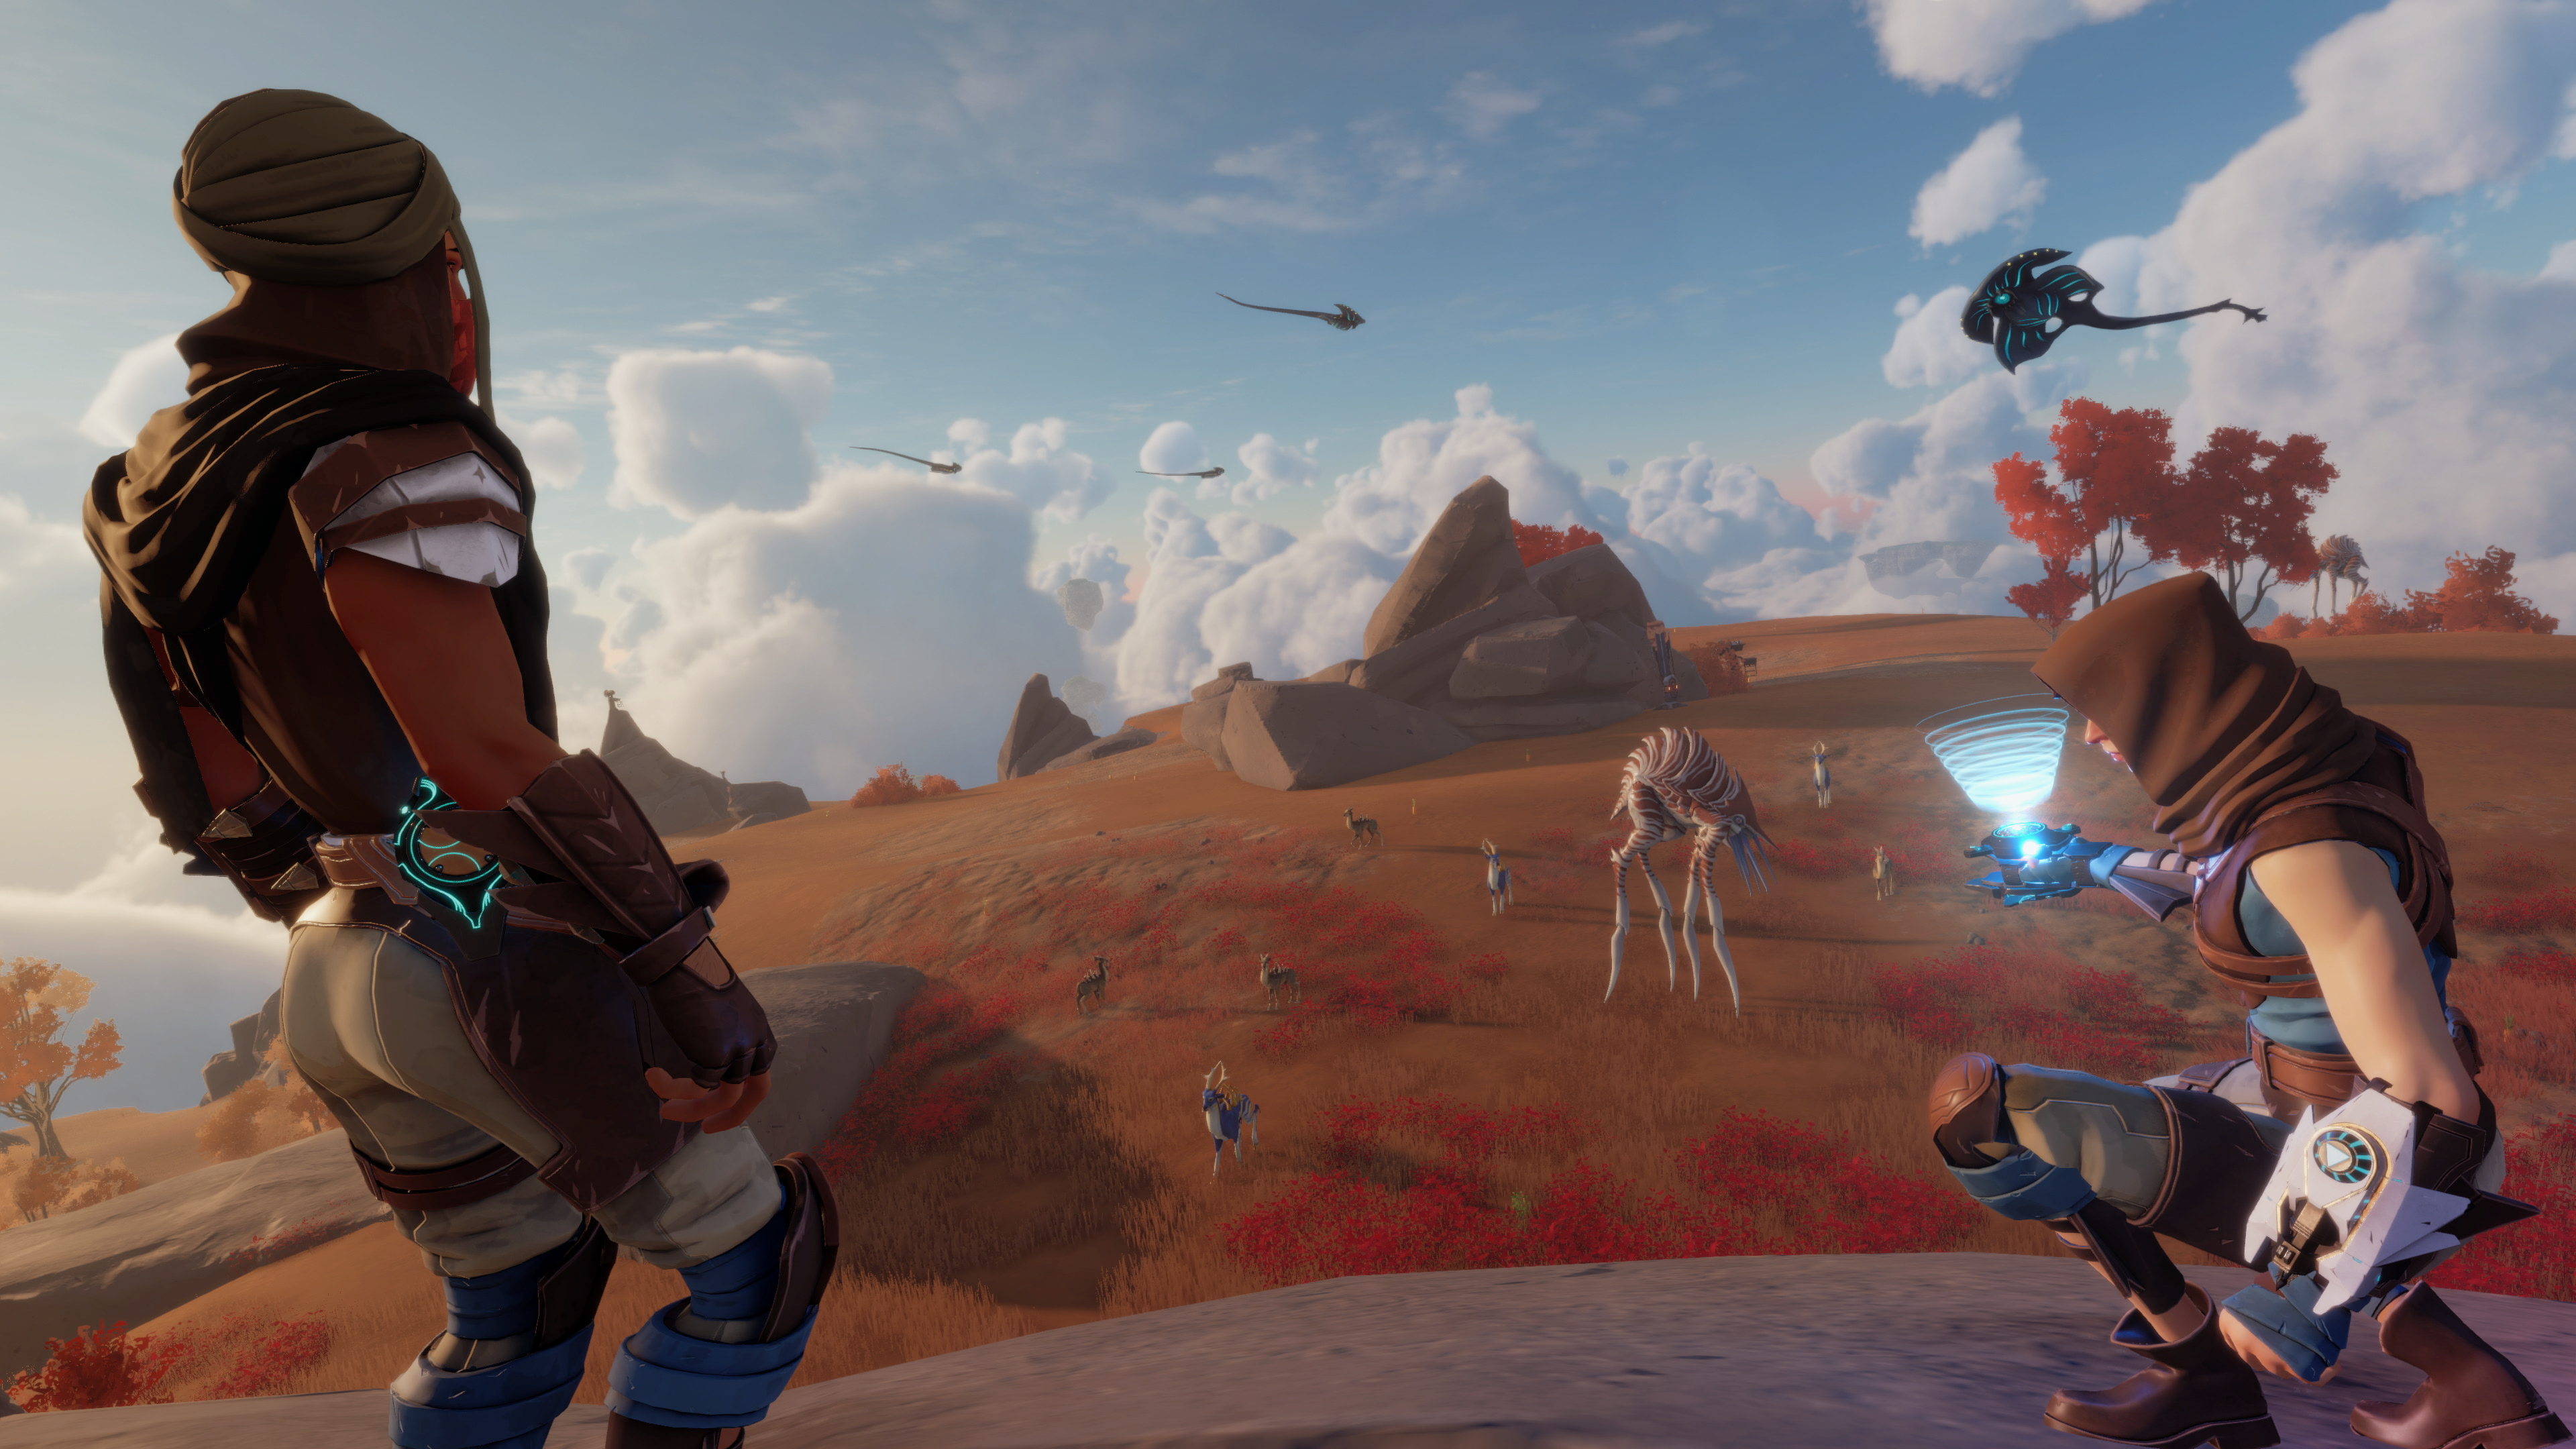 “The world of Lost Skies will be host to varied regions and biomes, with a range of lifeforms on the ground and in the sky. The deer, the flying mantas and the giant nautilus that these players are stalking can be sources of food and crafting materials - but the hunters can very quickly become the hunted.”